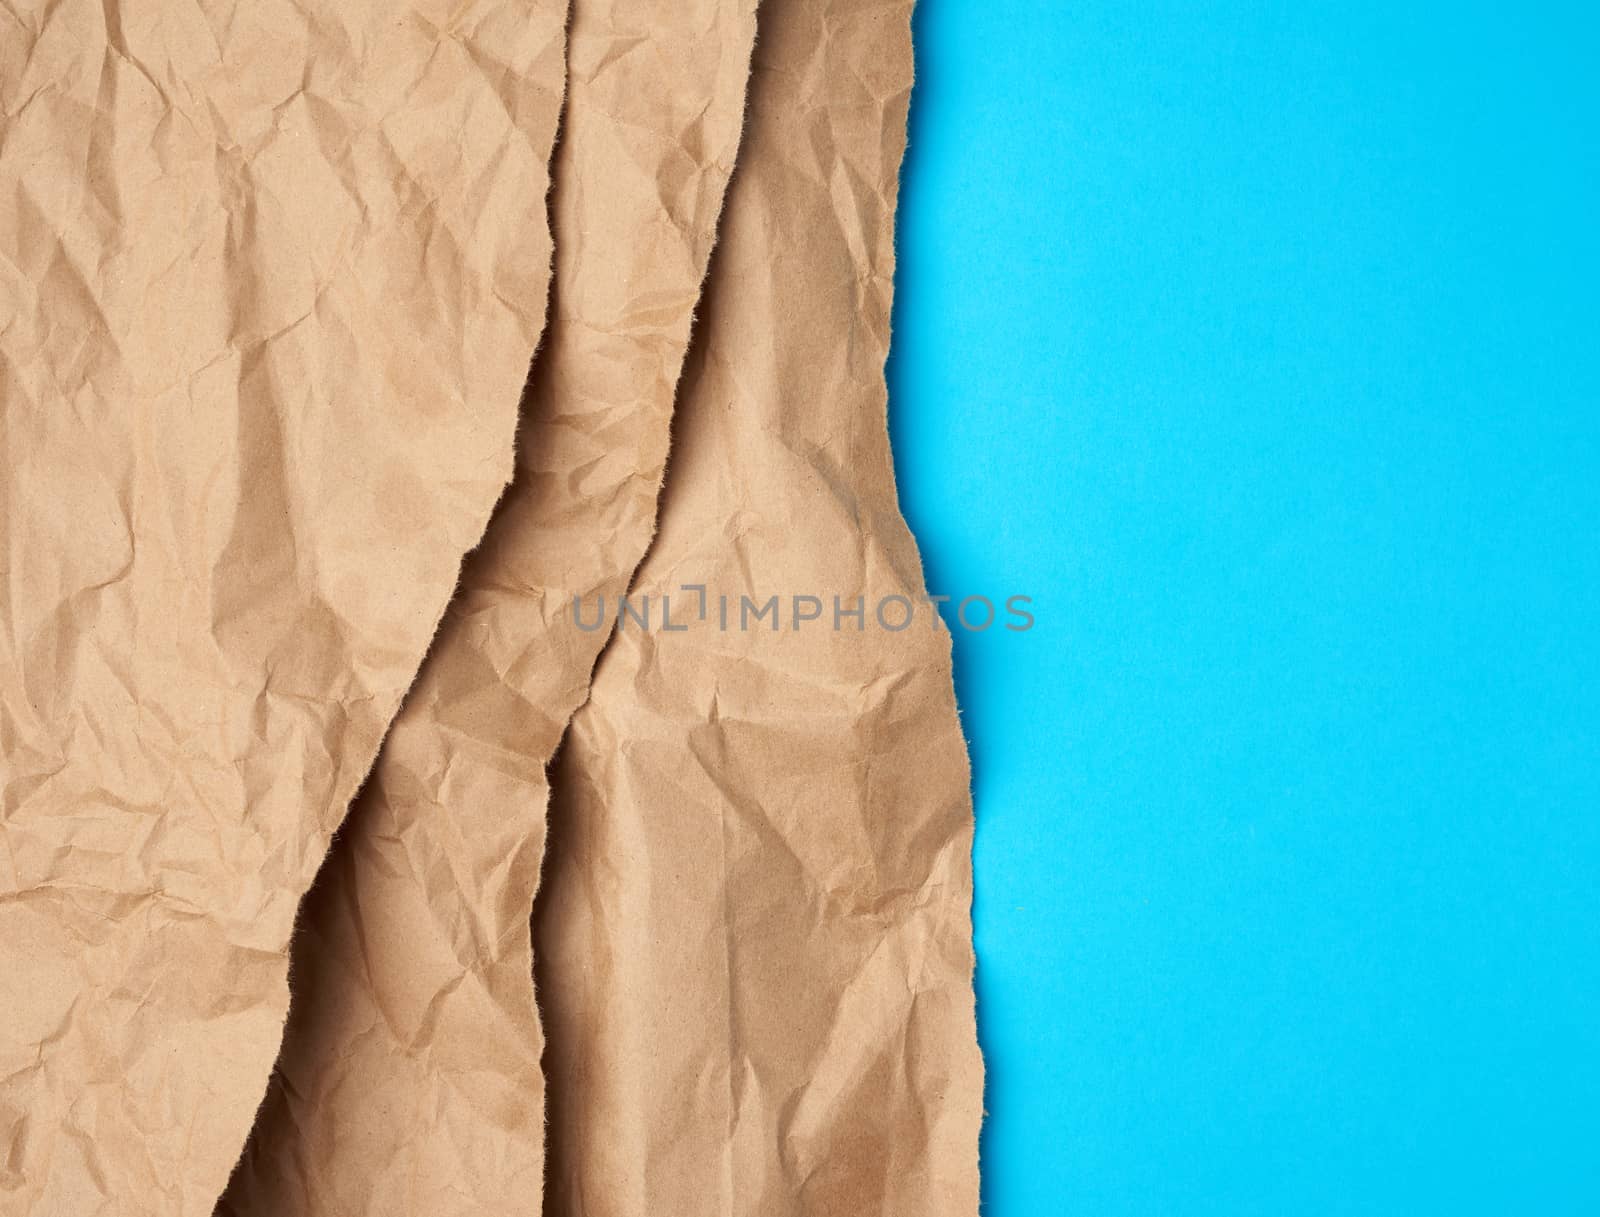 background of layered brown torn paper with a shadow on a blue background, backdrop and template for designer, copy space